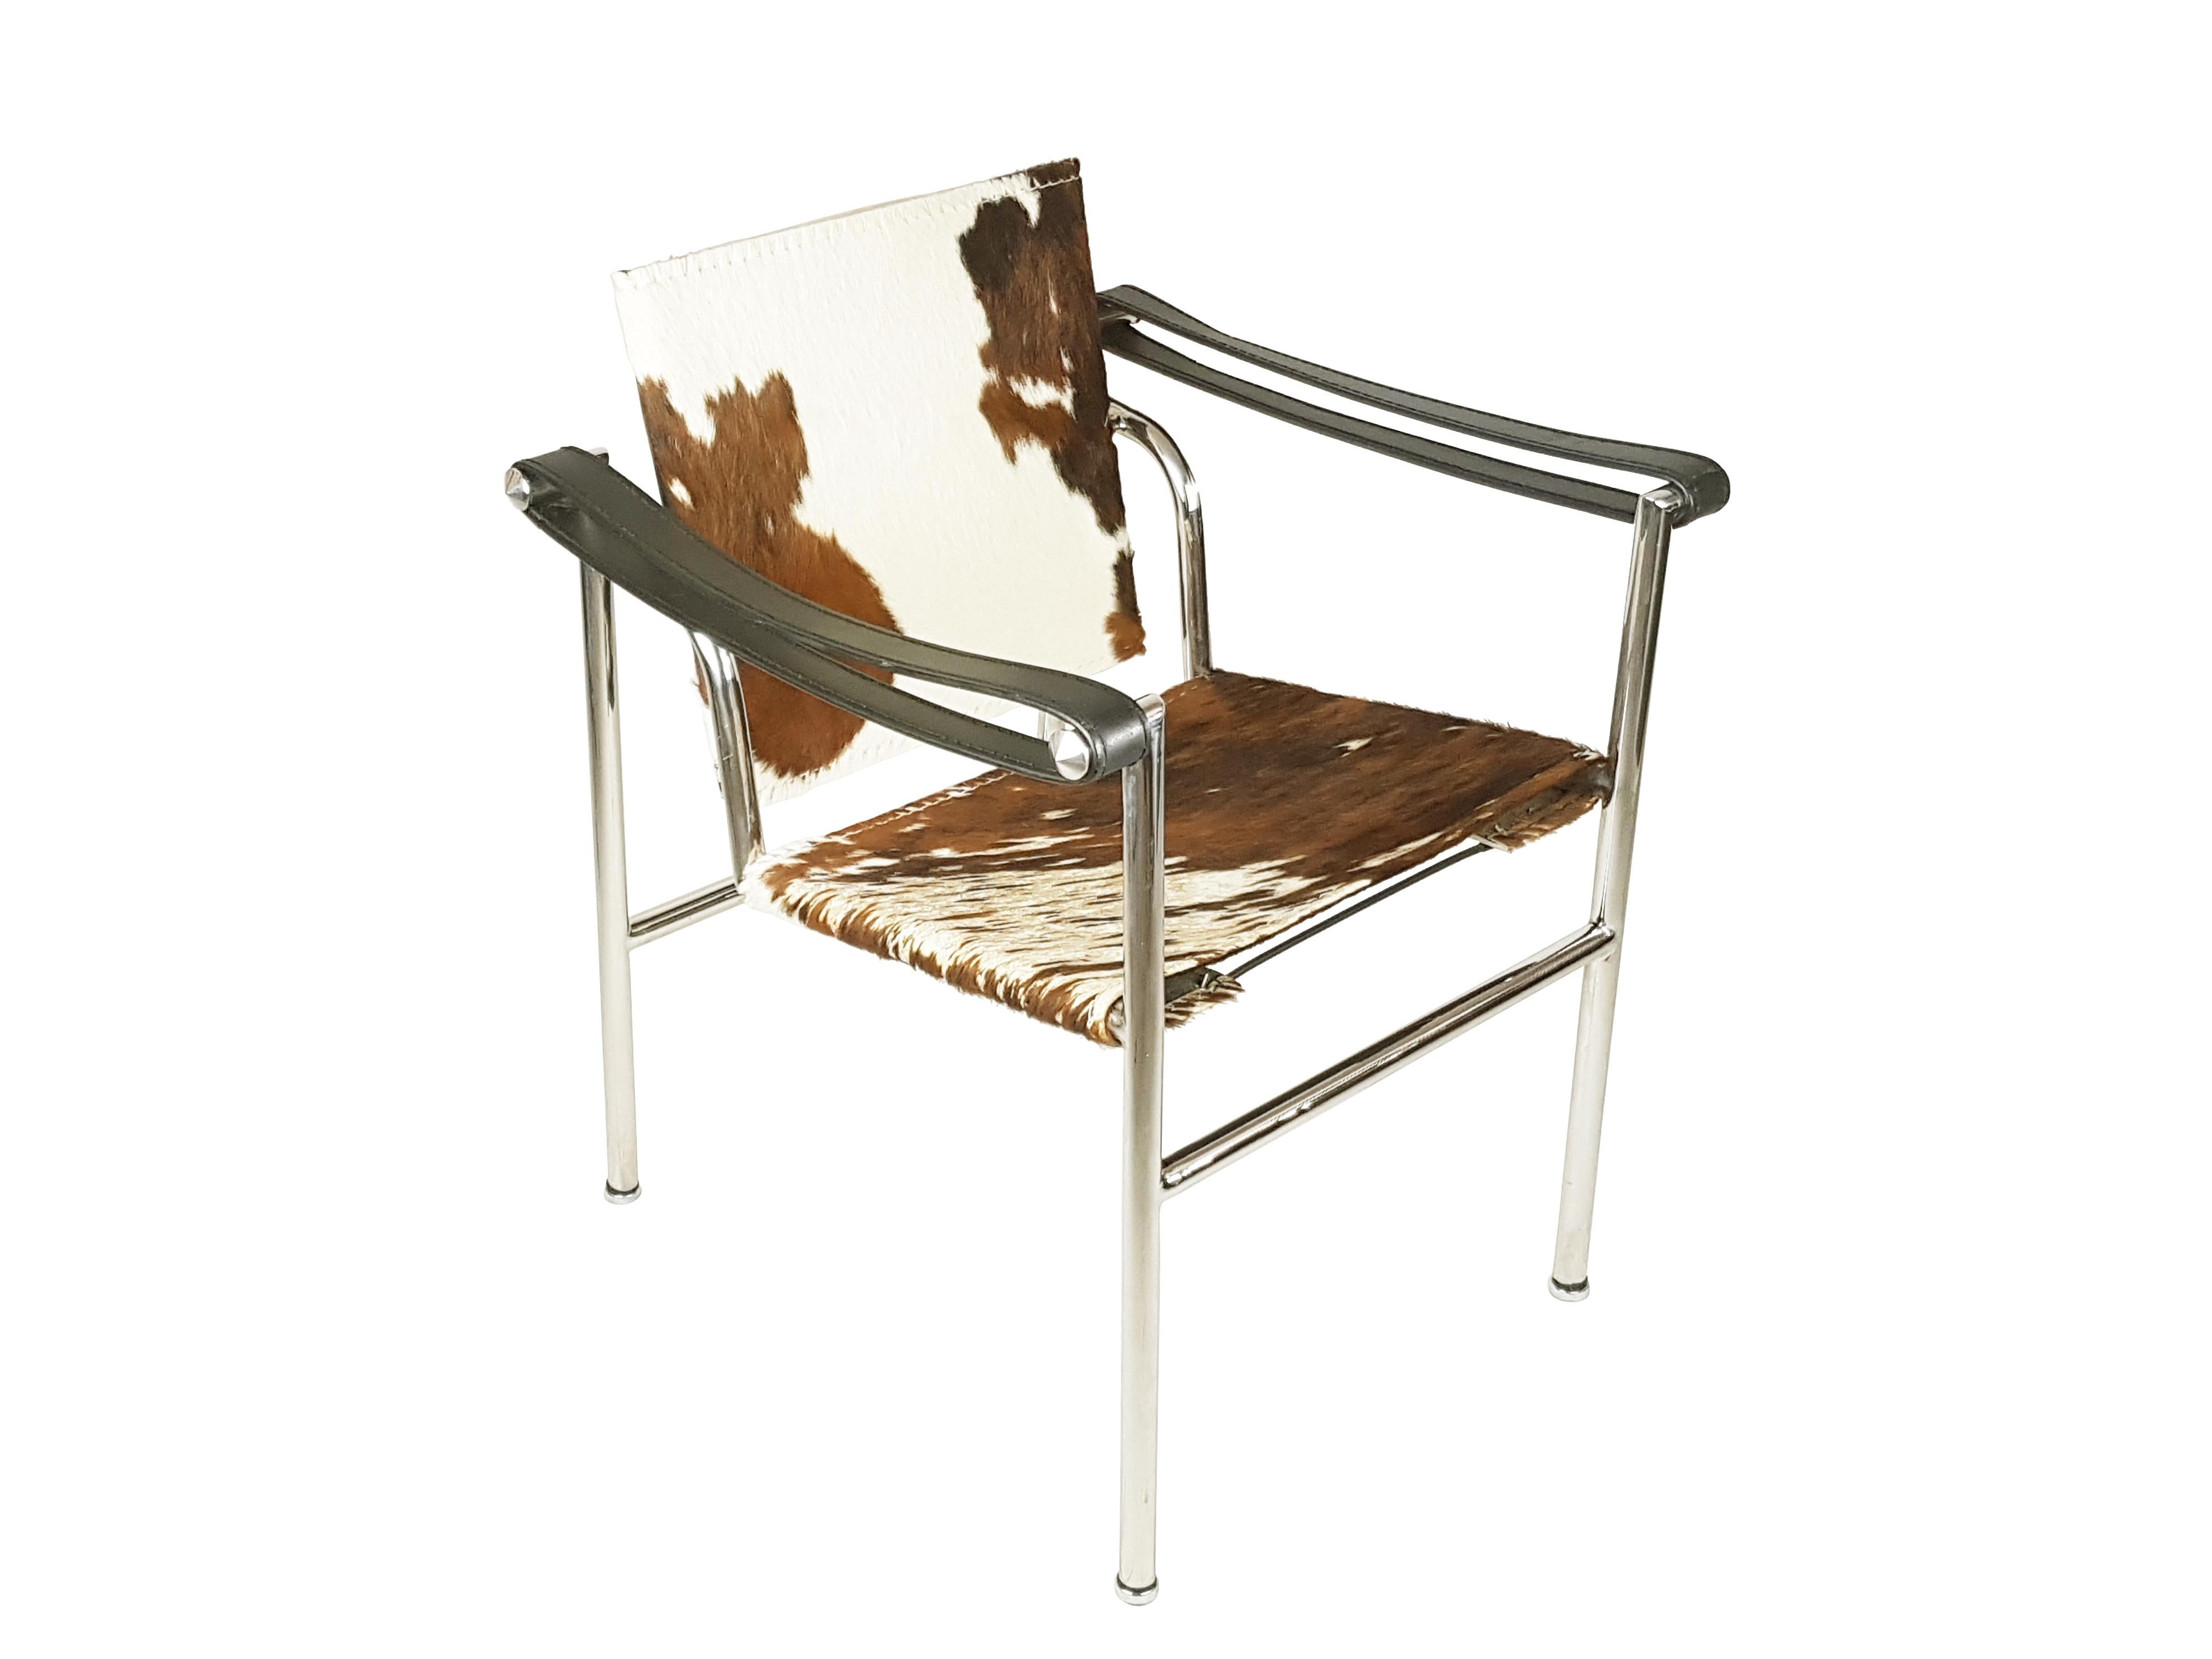 LC1 armchair designed by Le Corbusier in polished steel and chrome plated metal with seat and backrest in cow/pony leather. This armchair was produced between the '60 and the 70s. Although it does not features any signatures or serial numbers, it